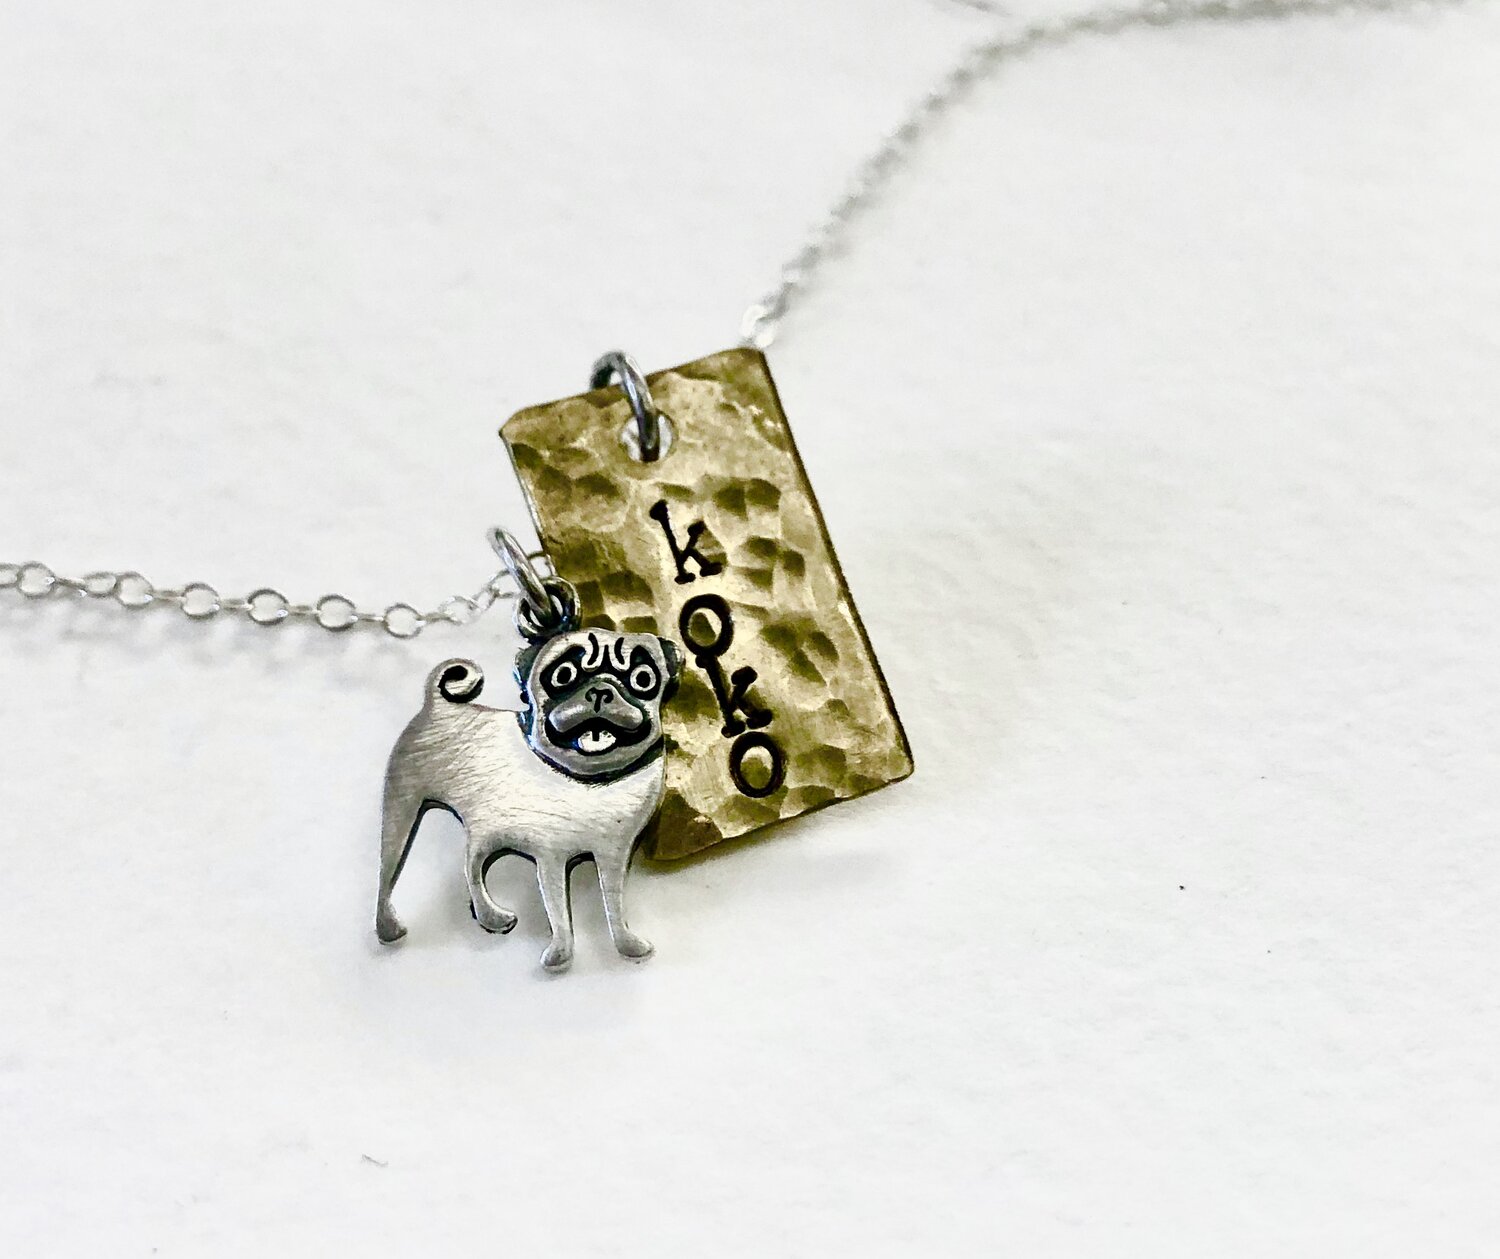 initial pendant necklace dog lover personalised pug necklace initial charm necklace pug gift Pug necklace pug charm alphabet pug fan